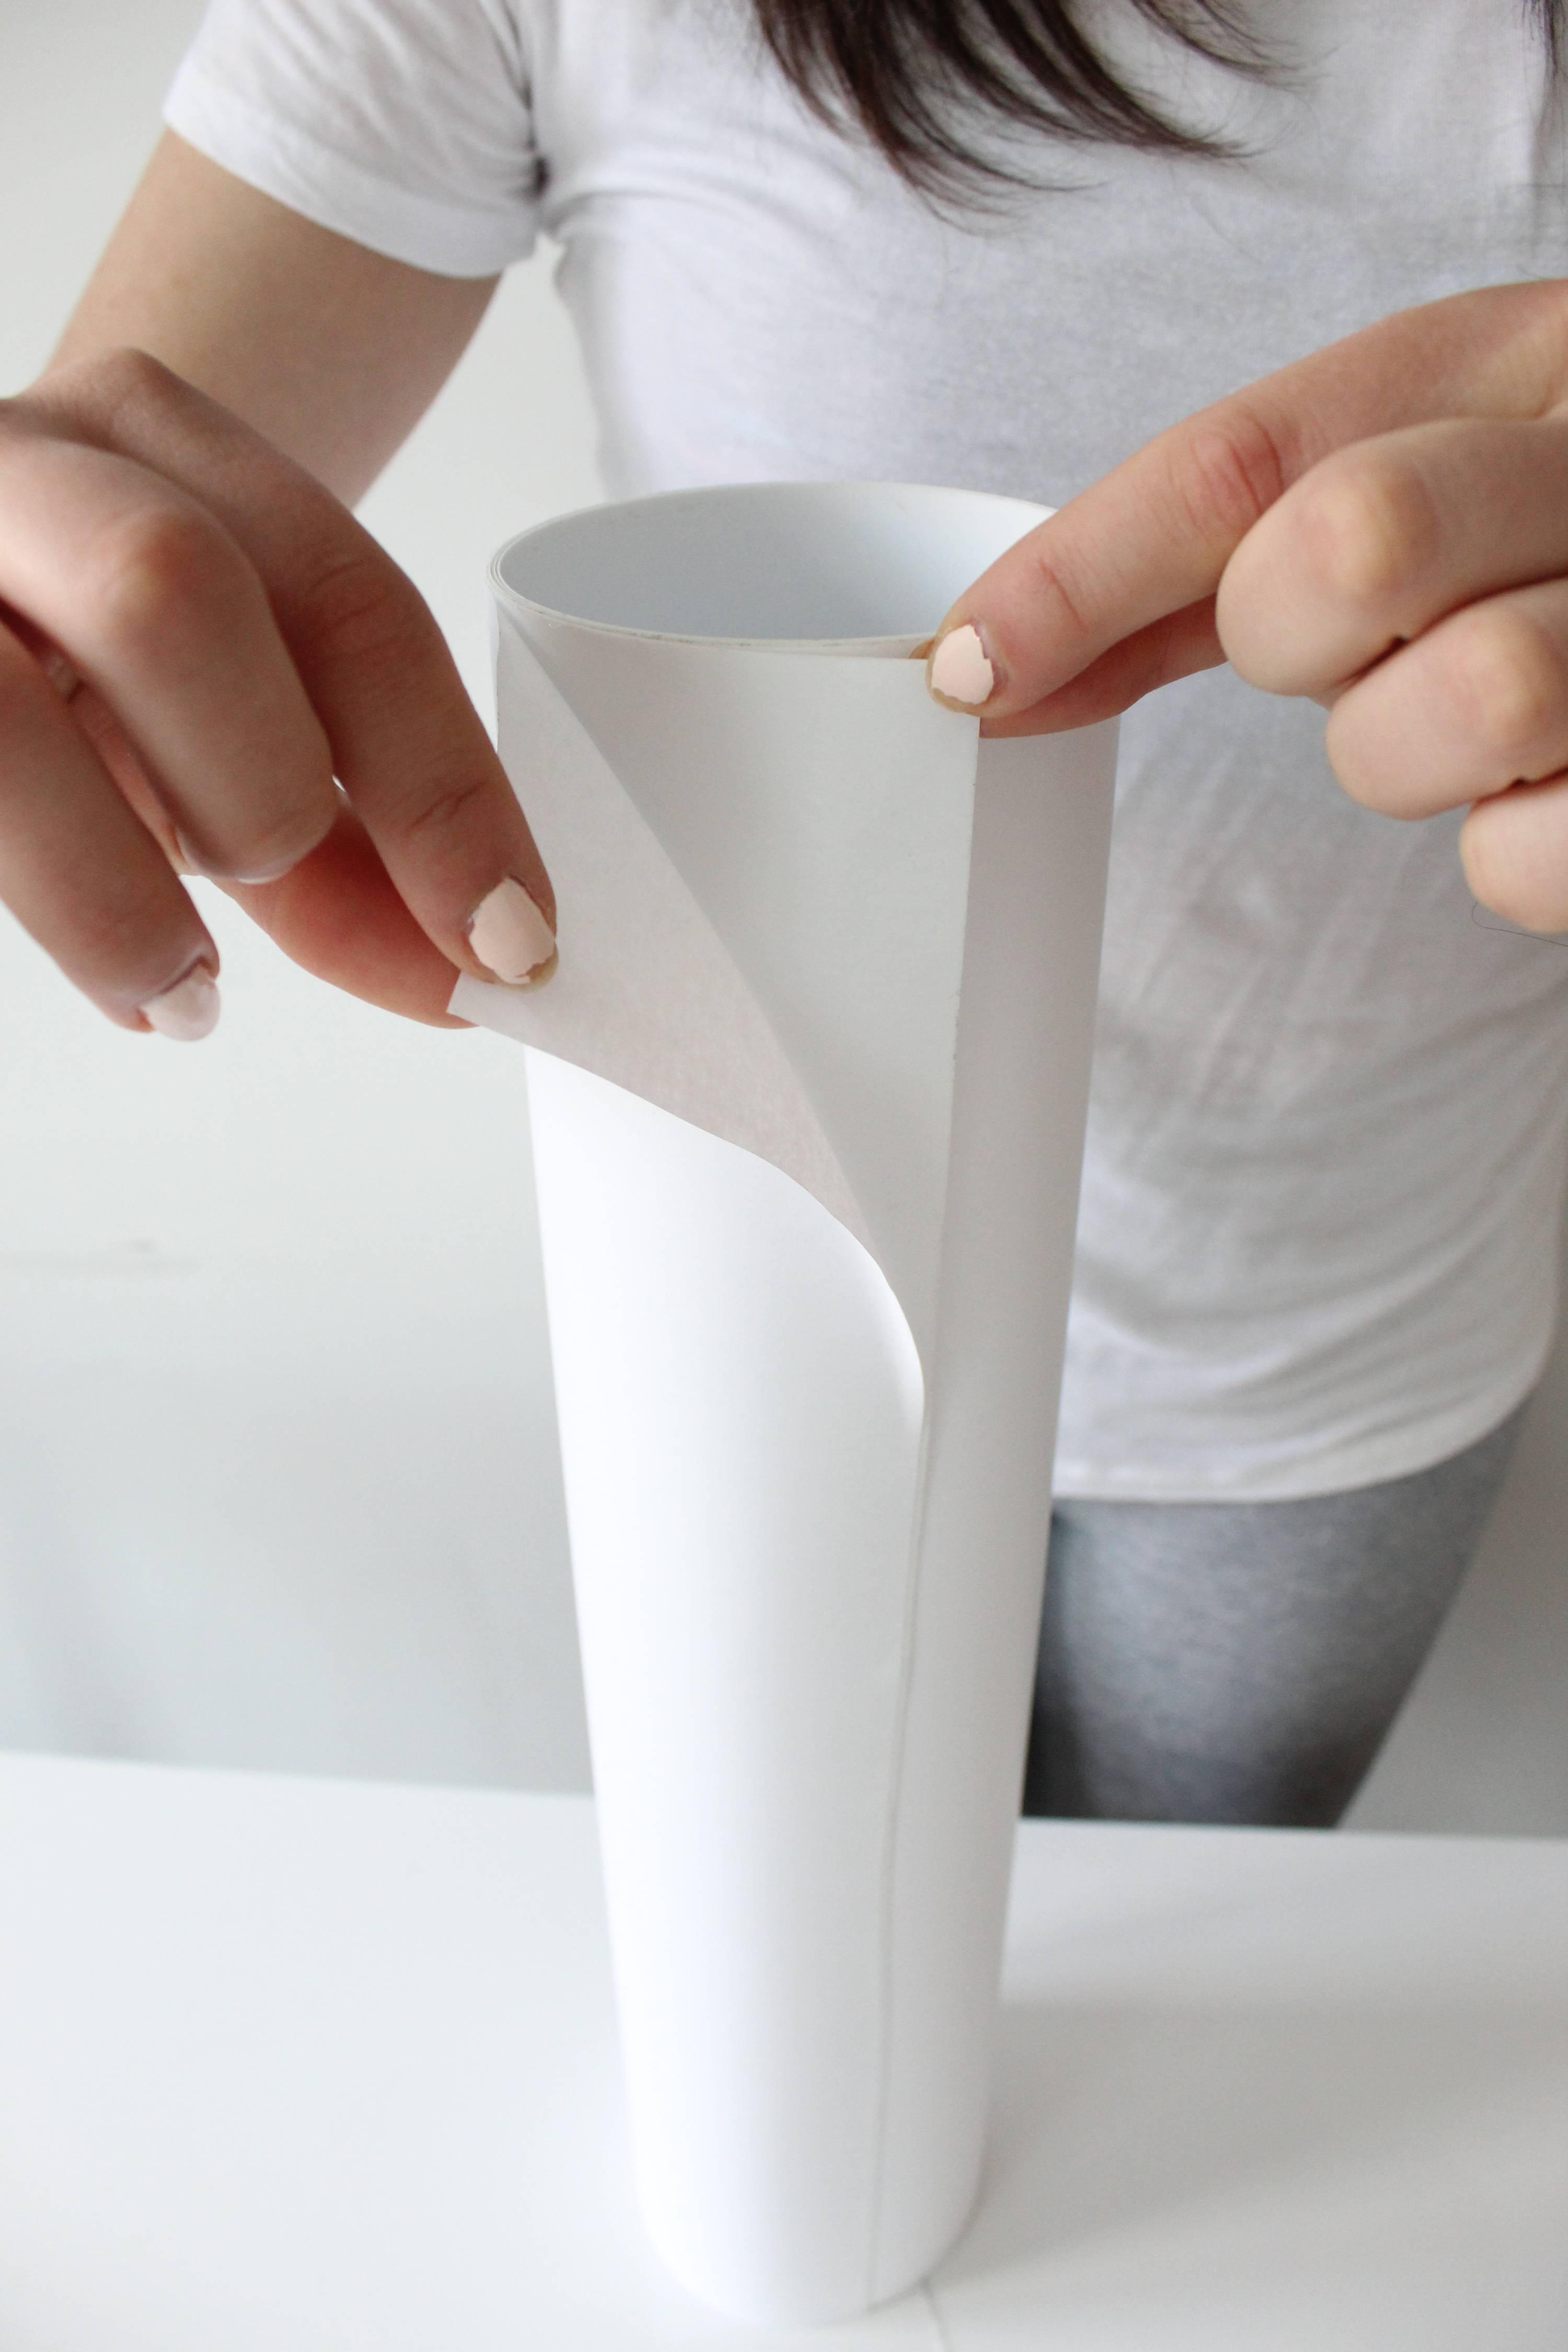 Making A Diy Lampshade From Scratch May, How To Make Your Own Lampshade From Scratch